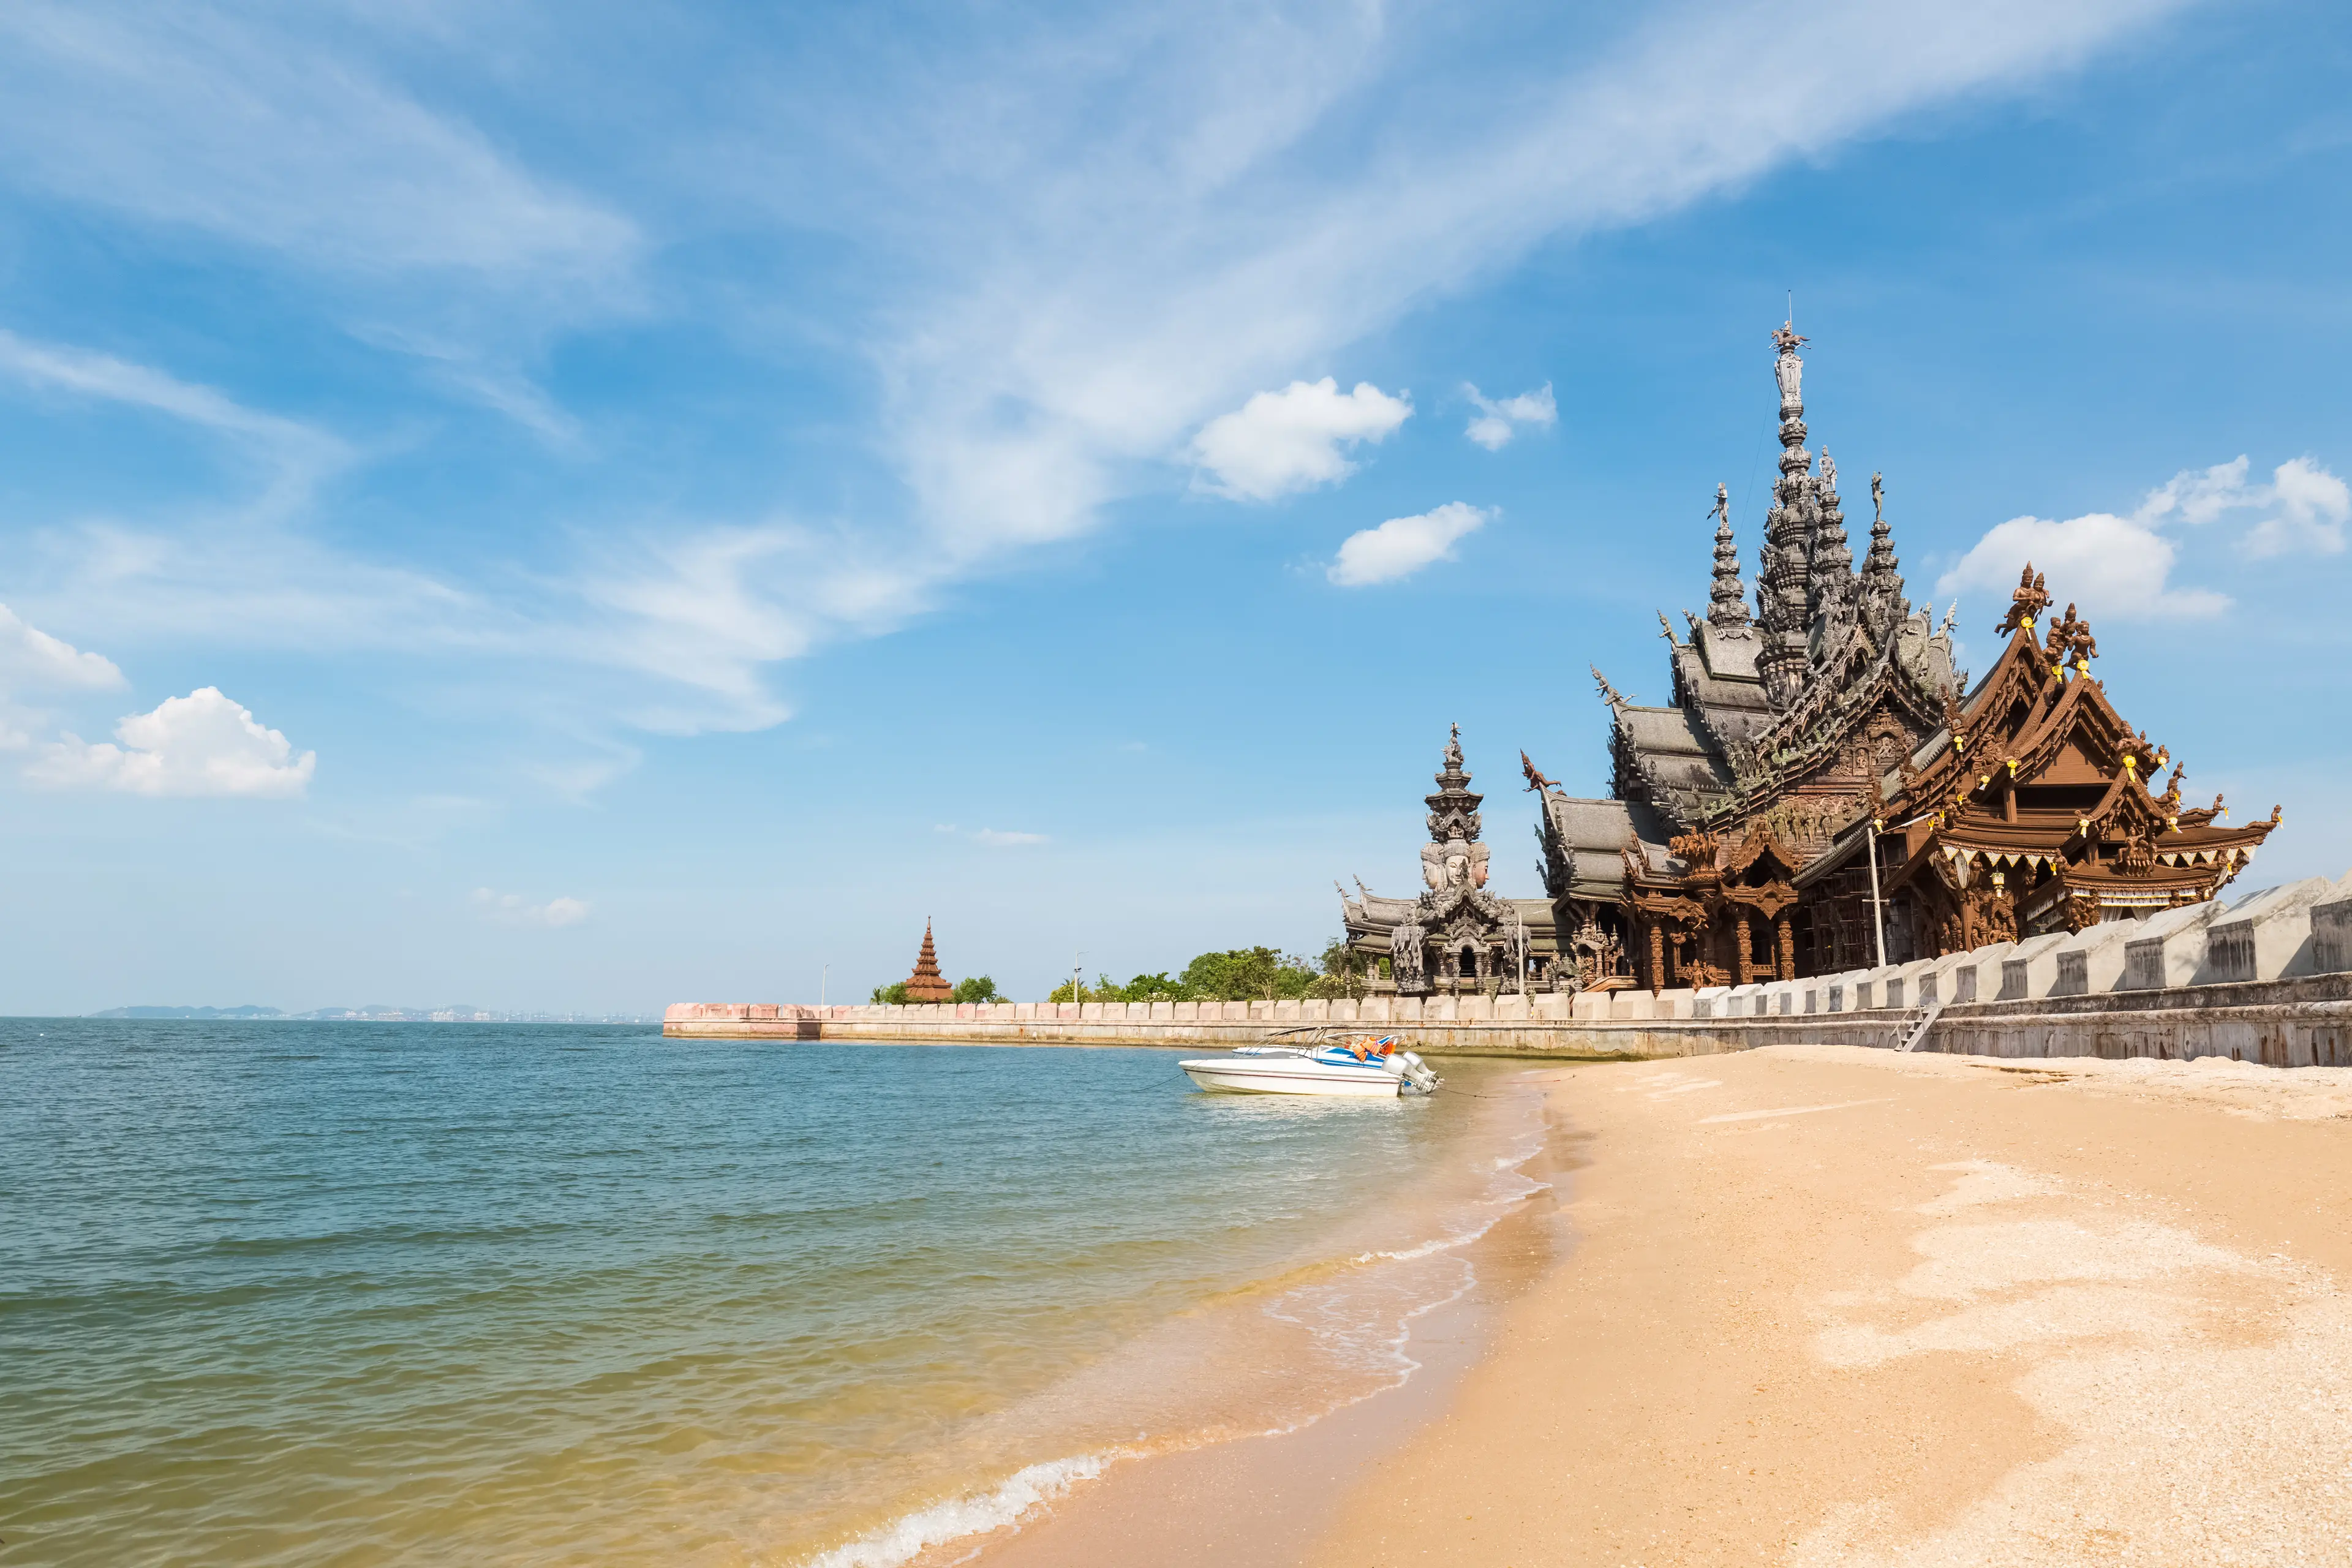 1-Day Local Family Itinerary for Pattaya: Relaxation and Outdoor Fun